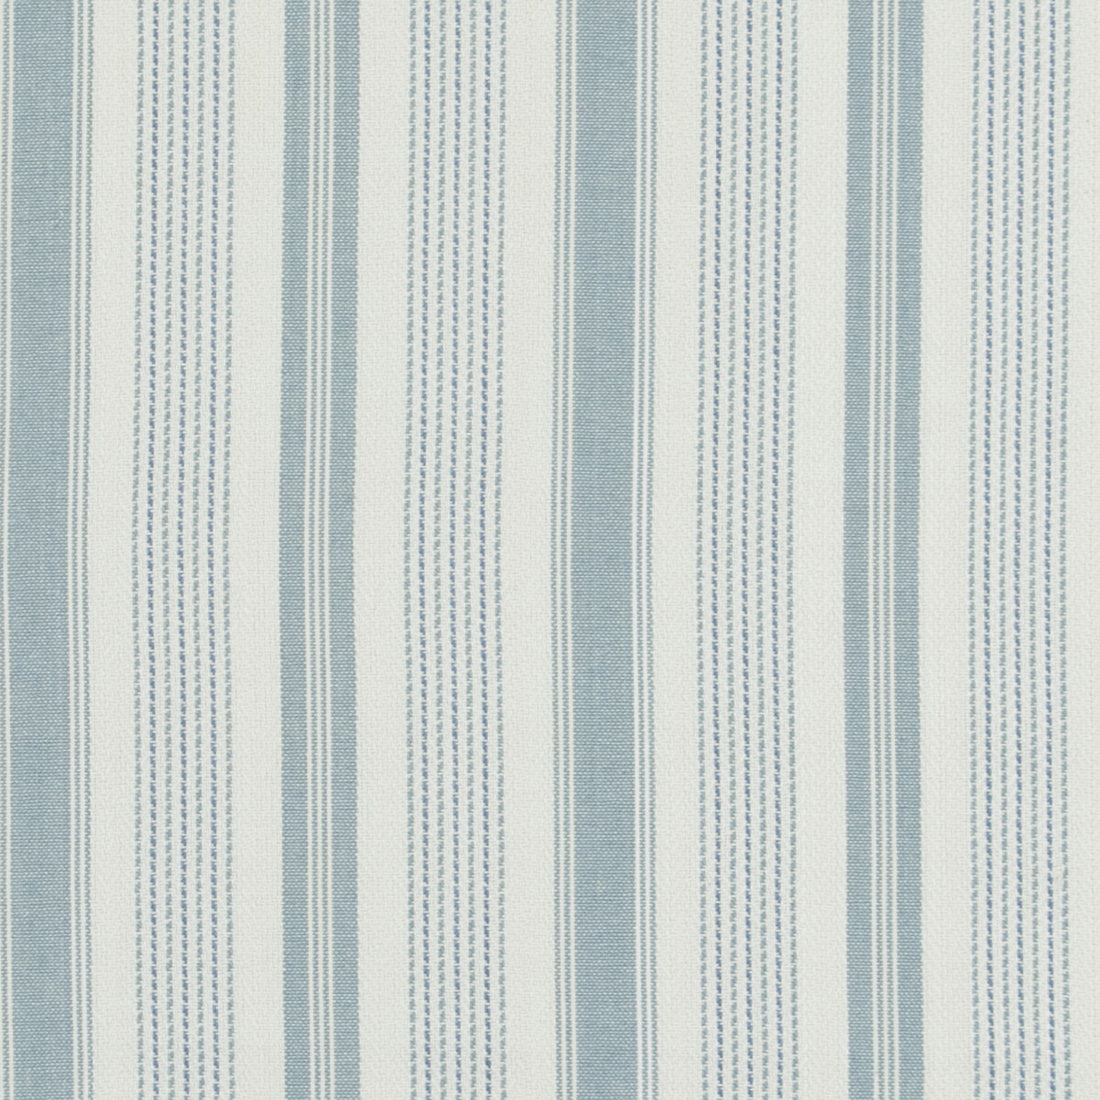 Purbeck Stripe fabric in aqua color - pattern PF50507.2.0 - by Baker Lifestyle in the Bridport collection